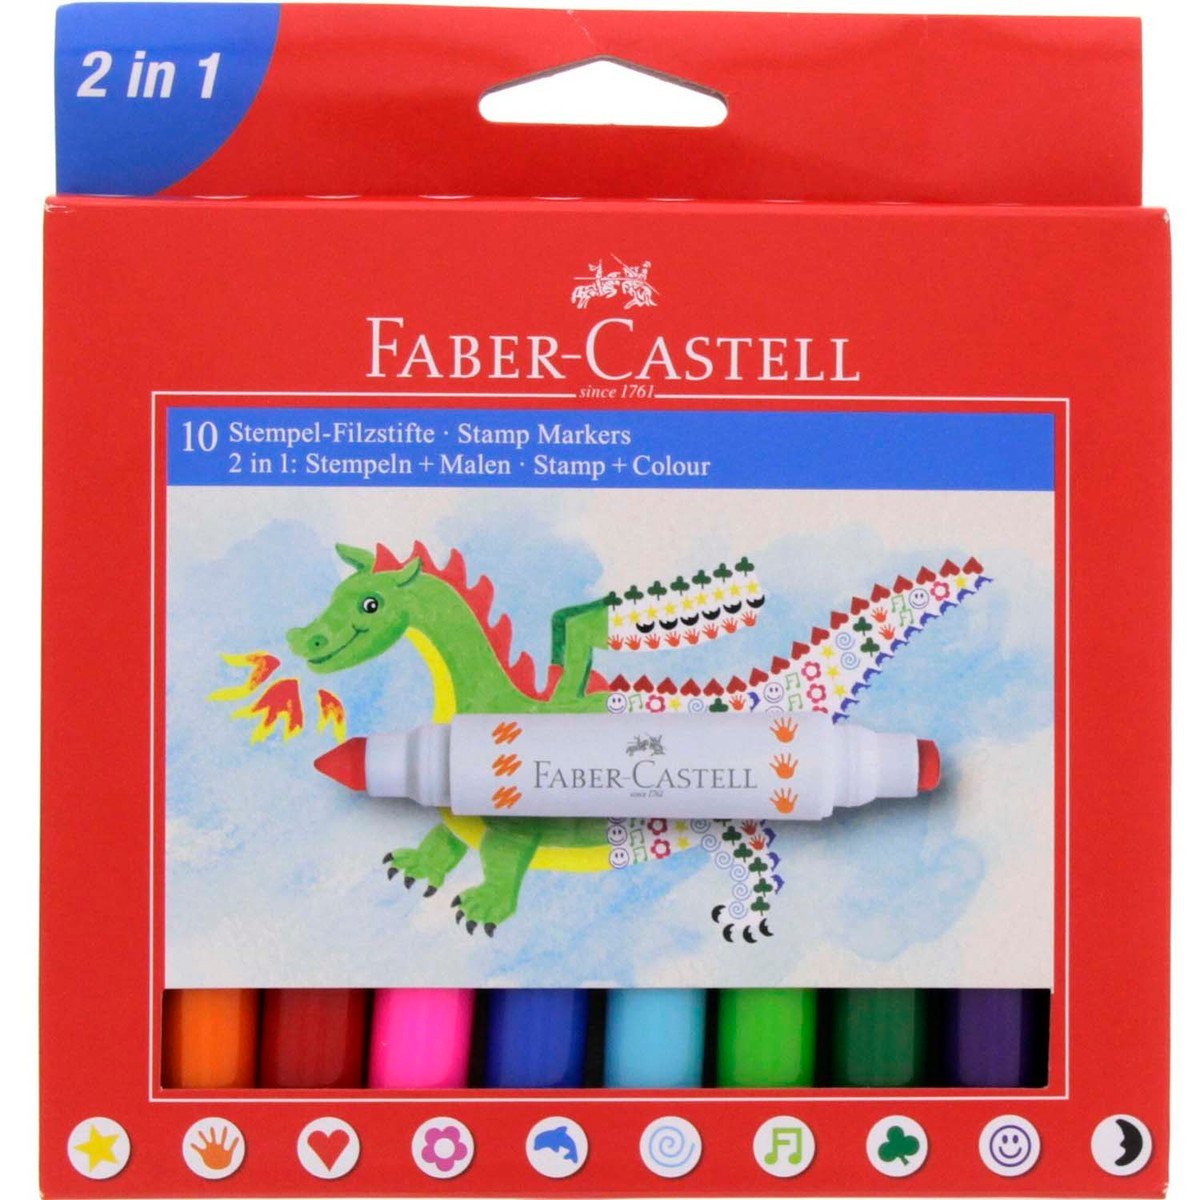 Faber-Castell Stamp Marker 2in1 FC155170